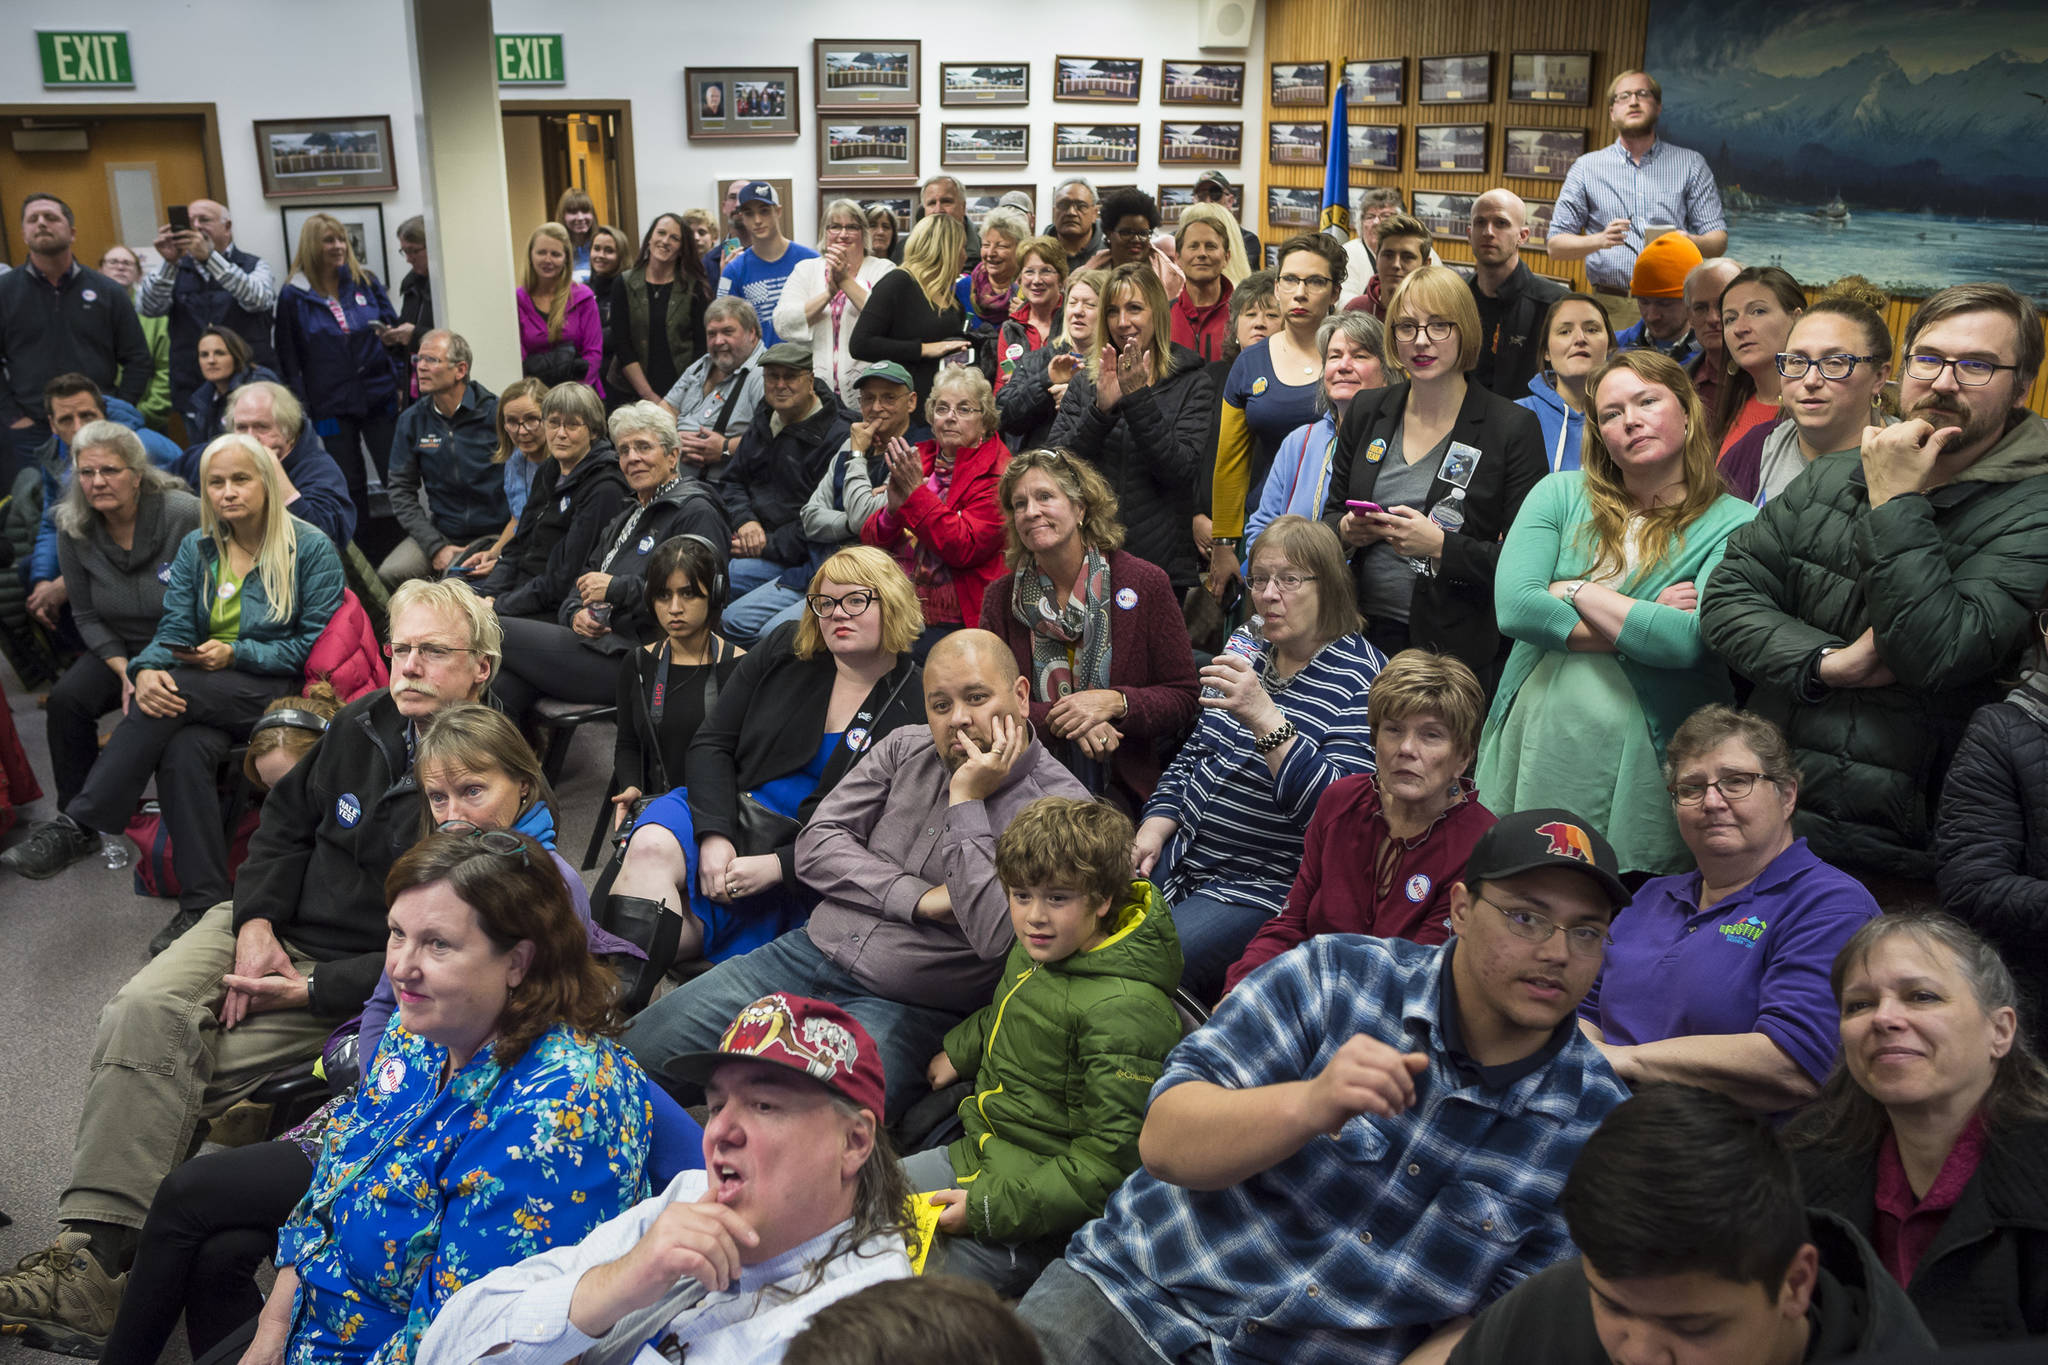 A packed house watches during Election night in the Assembly chambers on Tuesday, Oct. 2, 2018. (Michael Penn | Juneau Empire)